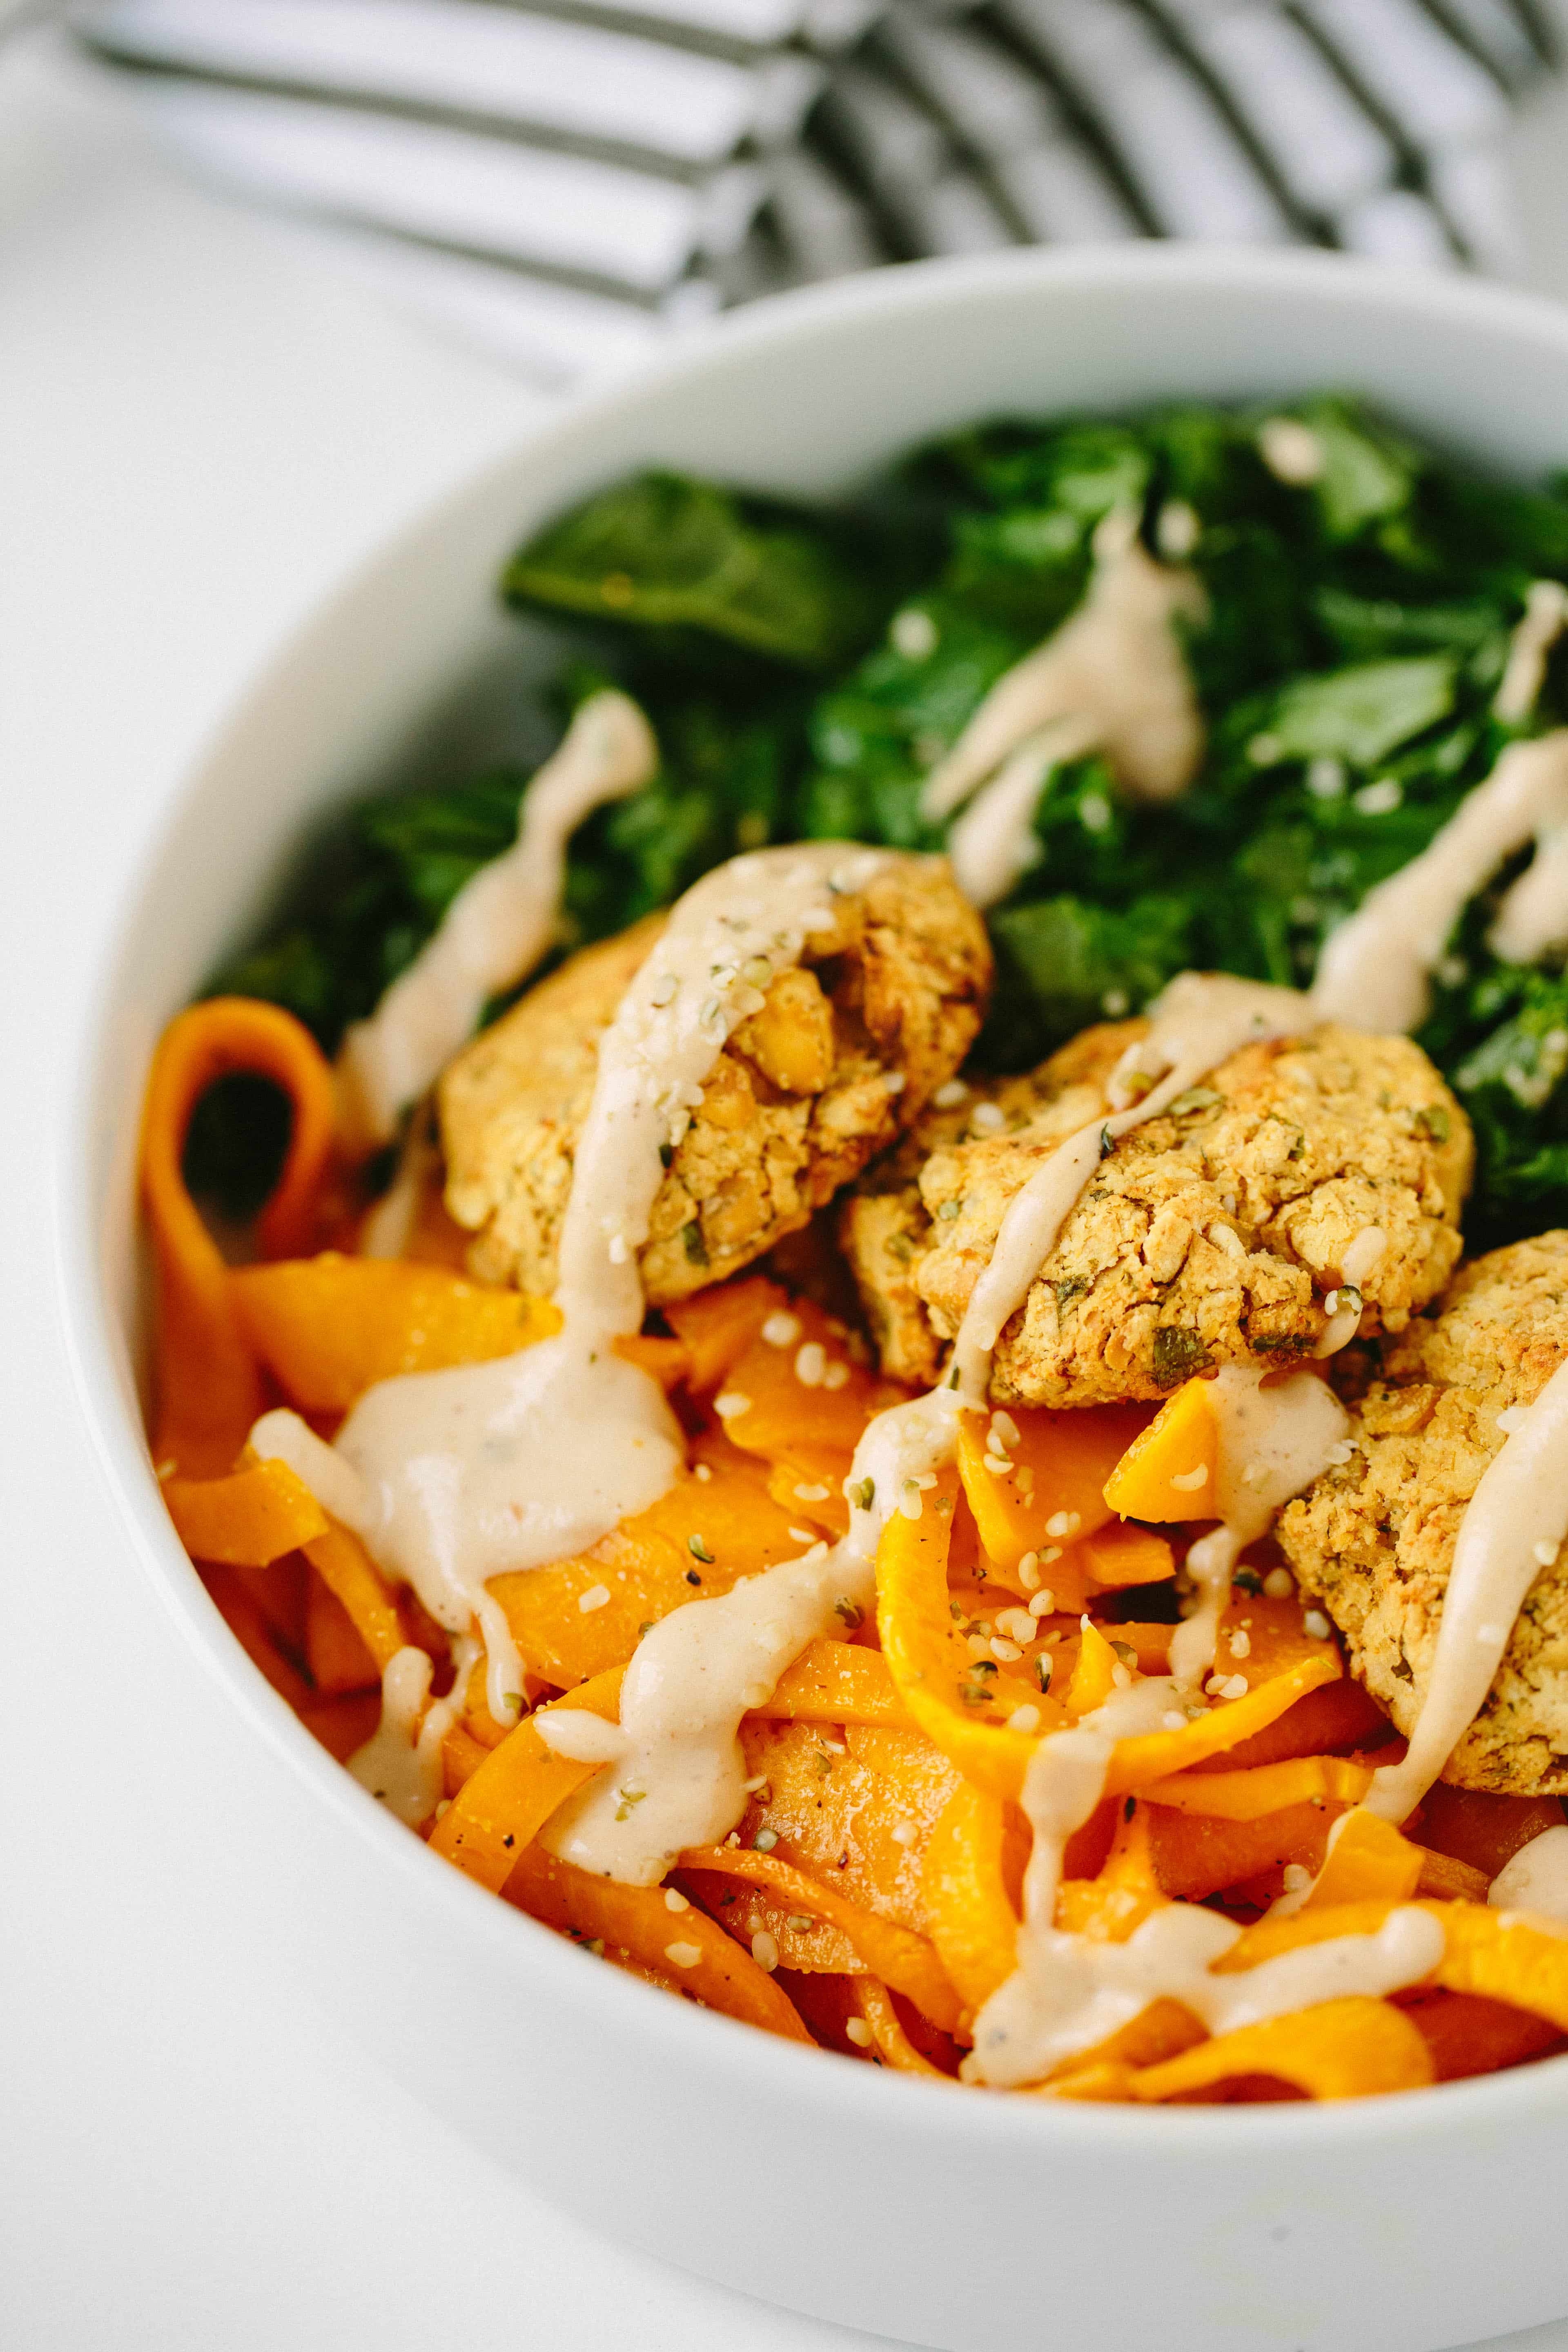 Kale and Falafel Bowls with Spiralized Butternut Squash